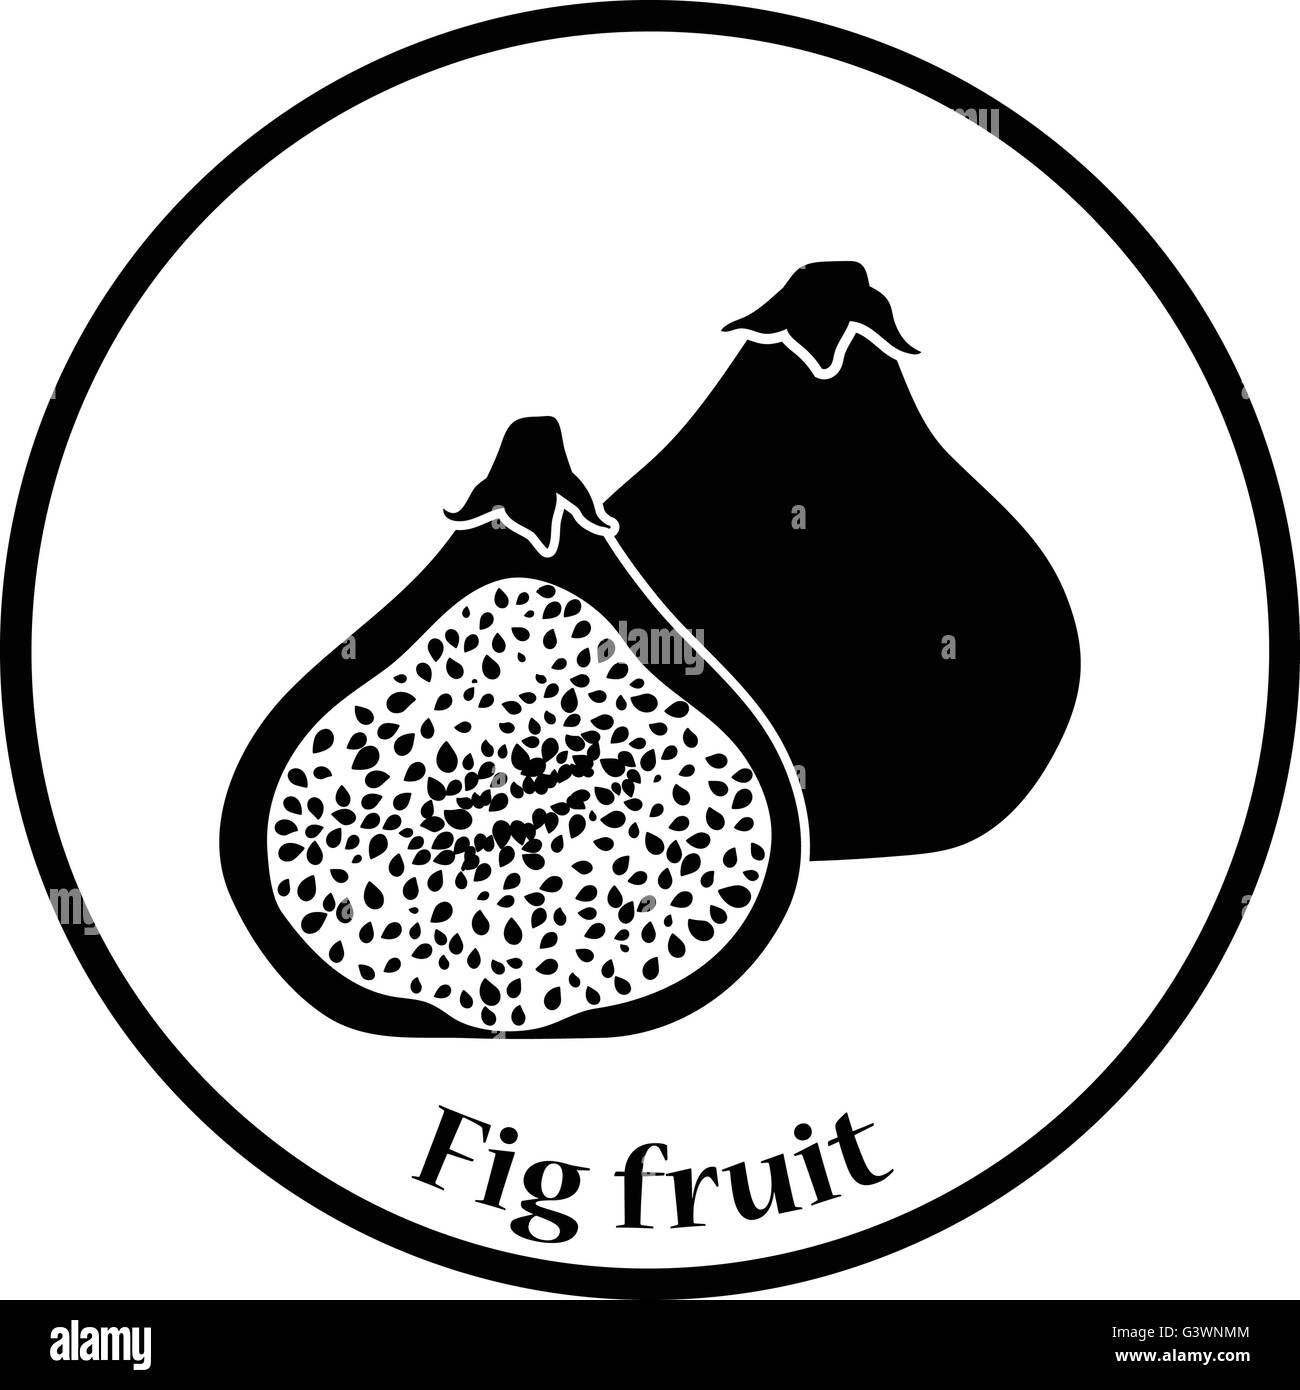 Icon of Fig fruit. Thin circle design. Vector illustration. Stock Vector